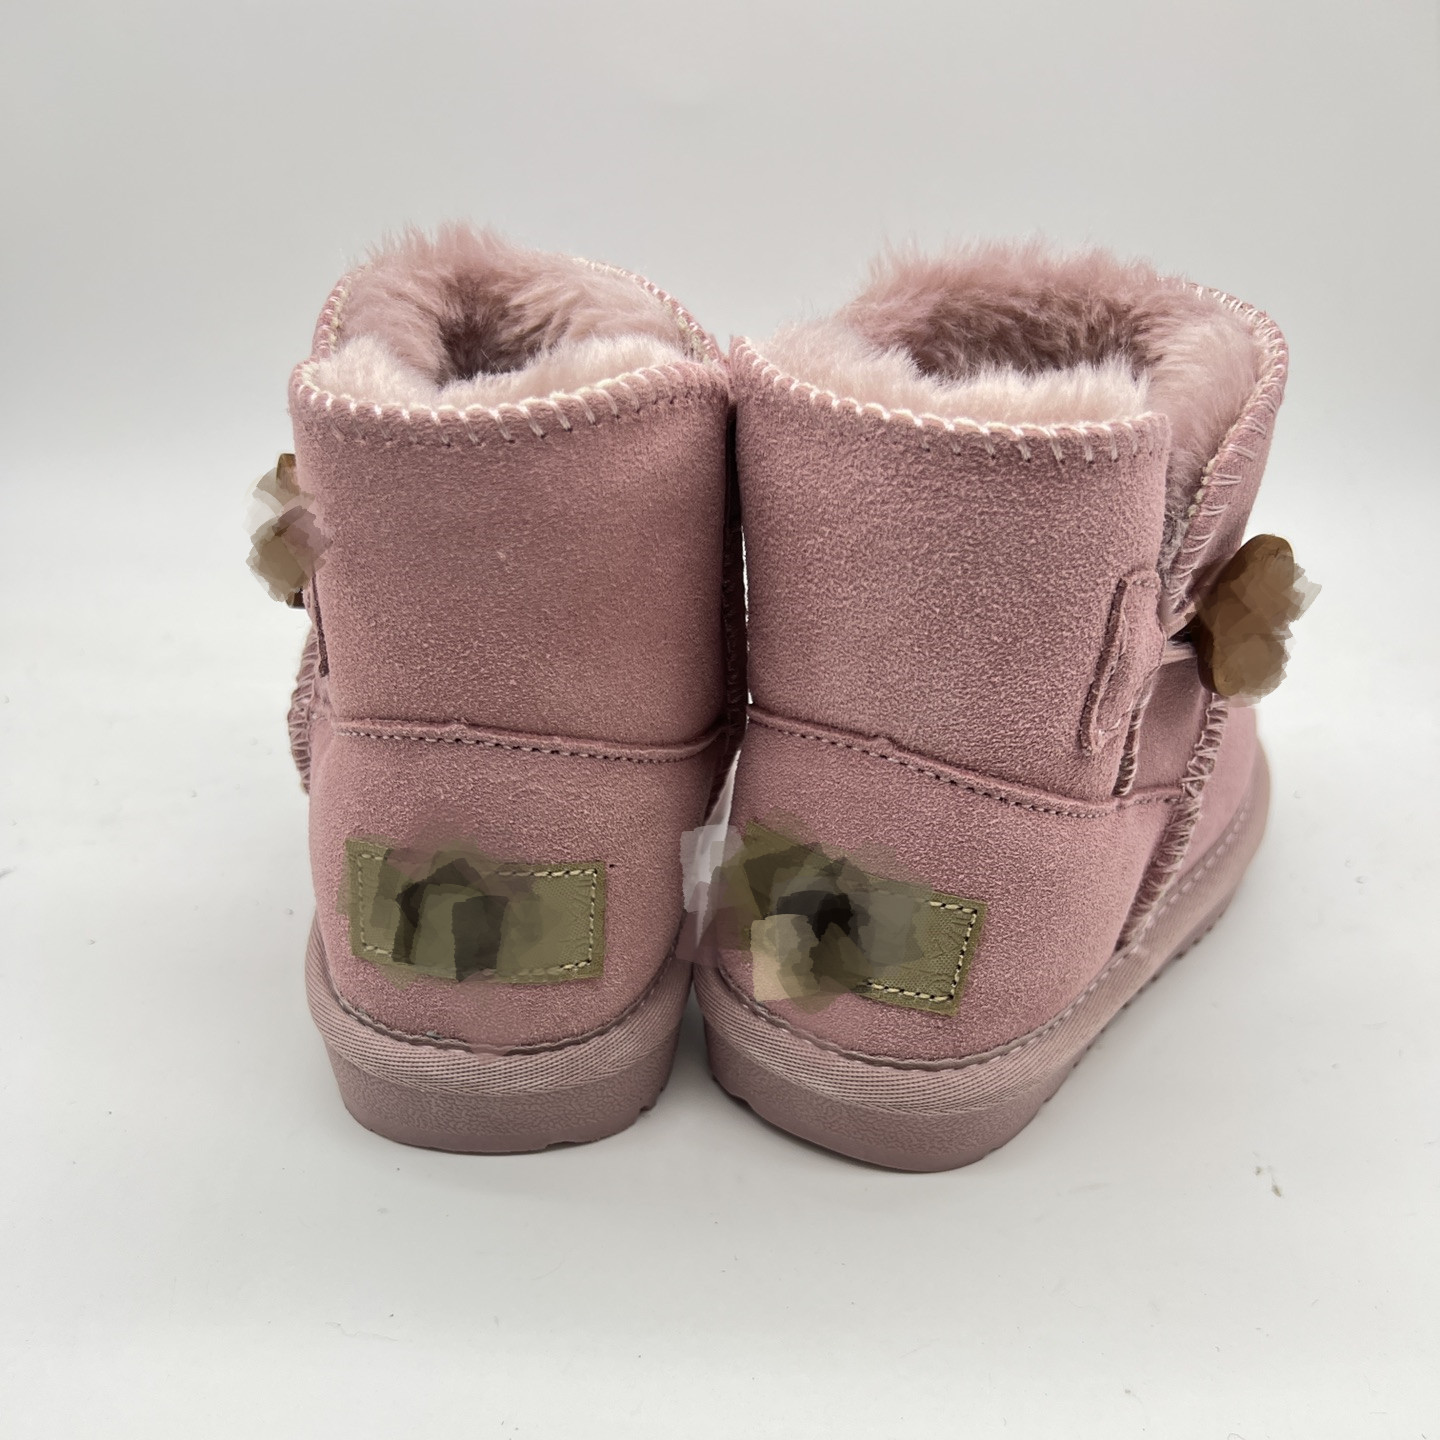 Kids Australia Mini Classic Button designer uggss Boots Children boys Girls infants Snow Boot Fur fluffy Winter Warm Ugglie Youth Big Kid Shoes Toddler Baby Booties